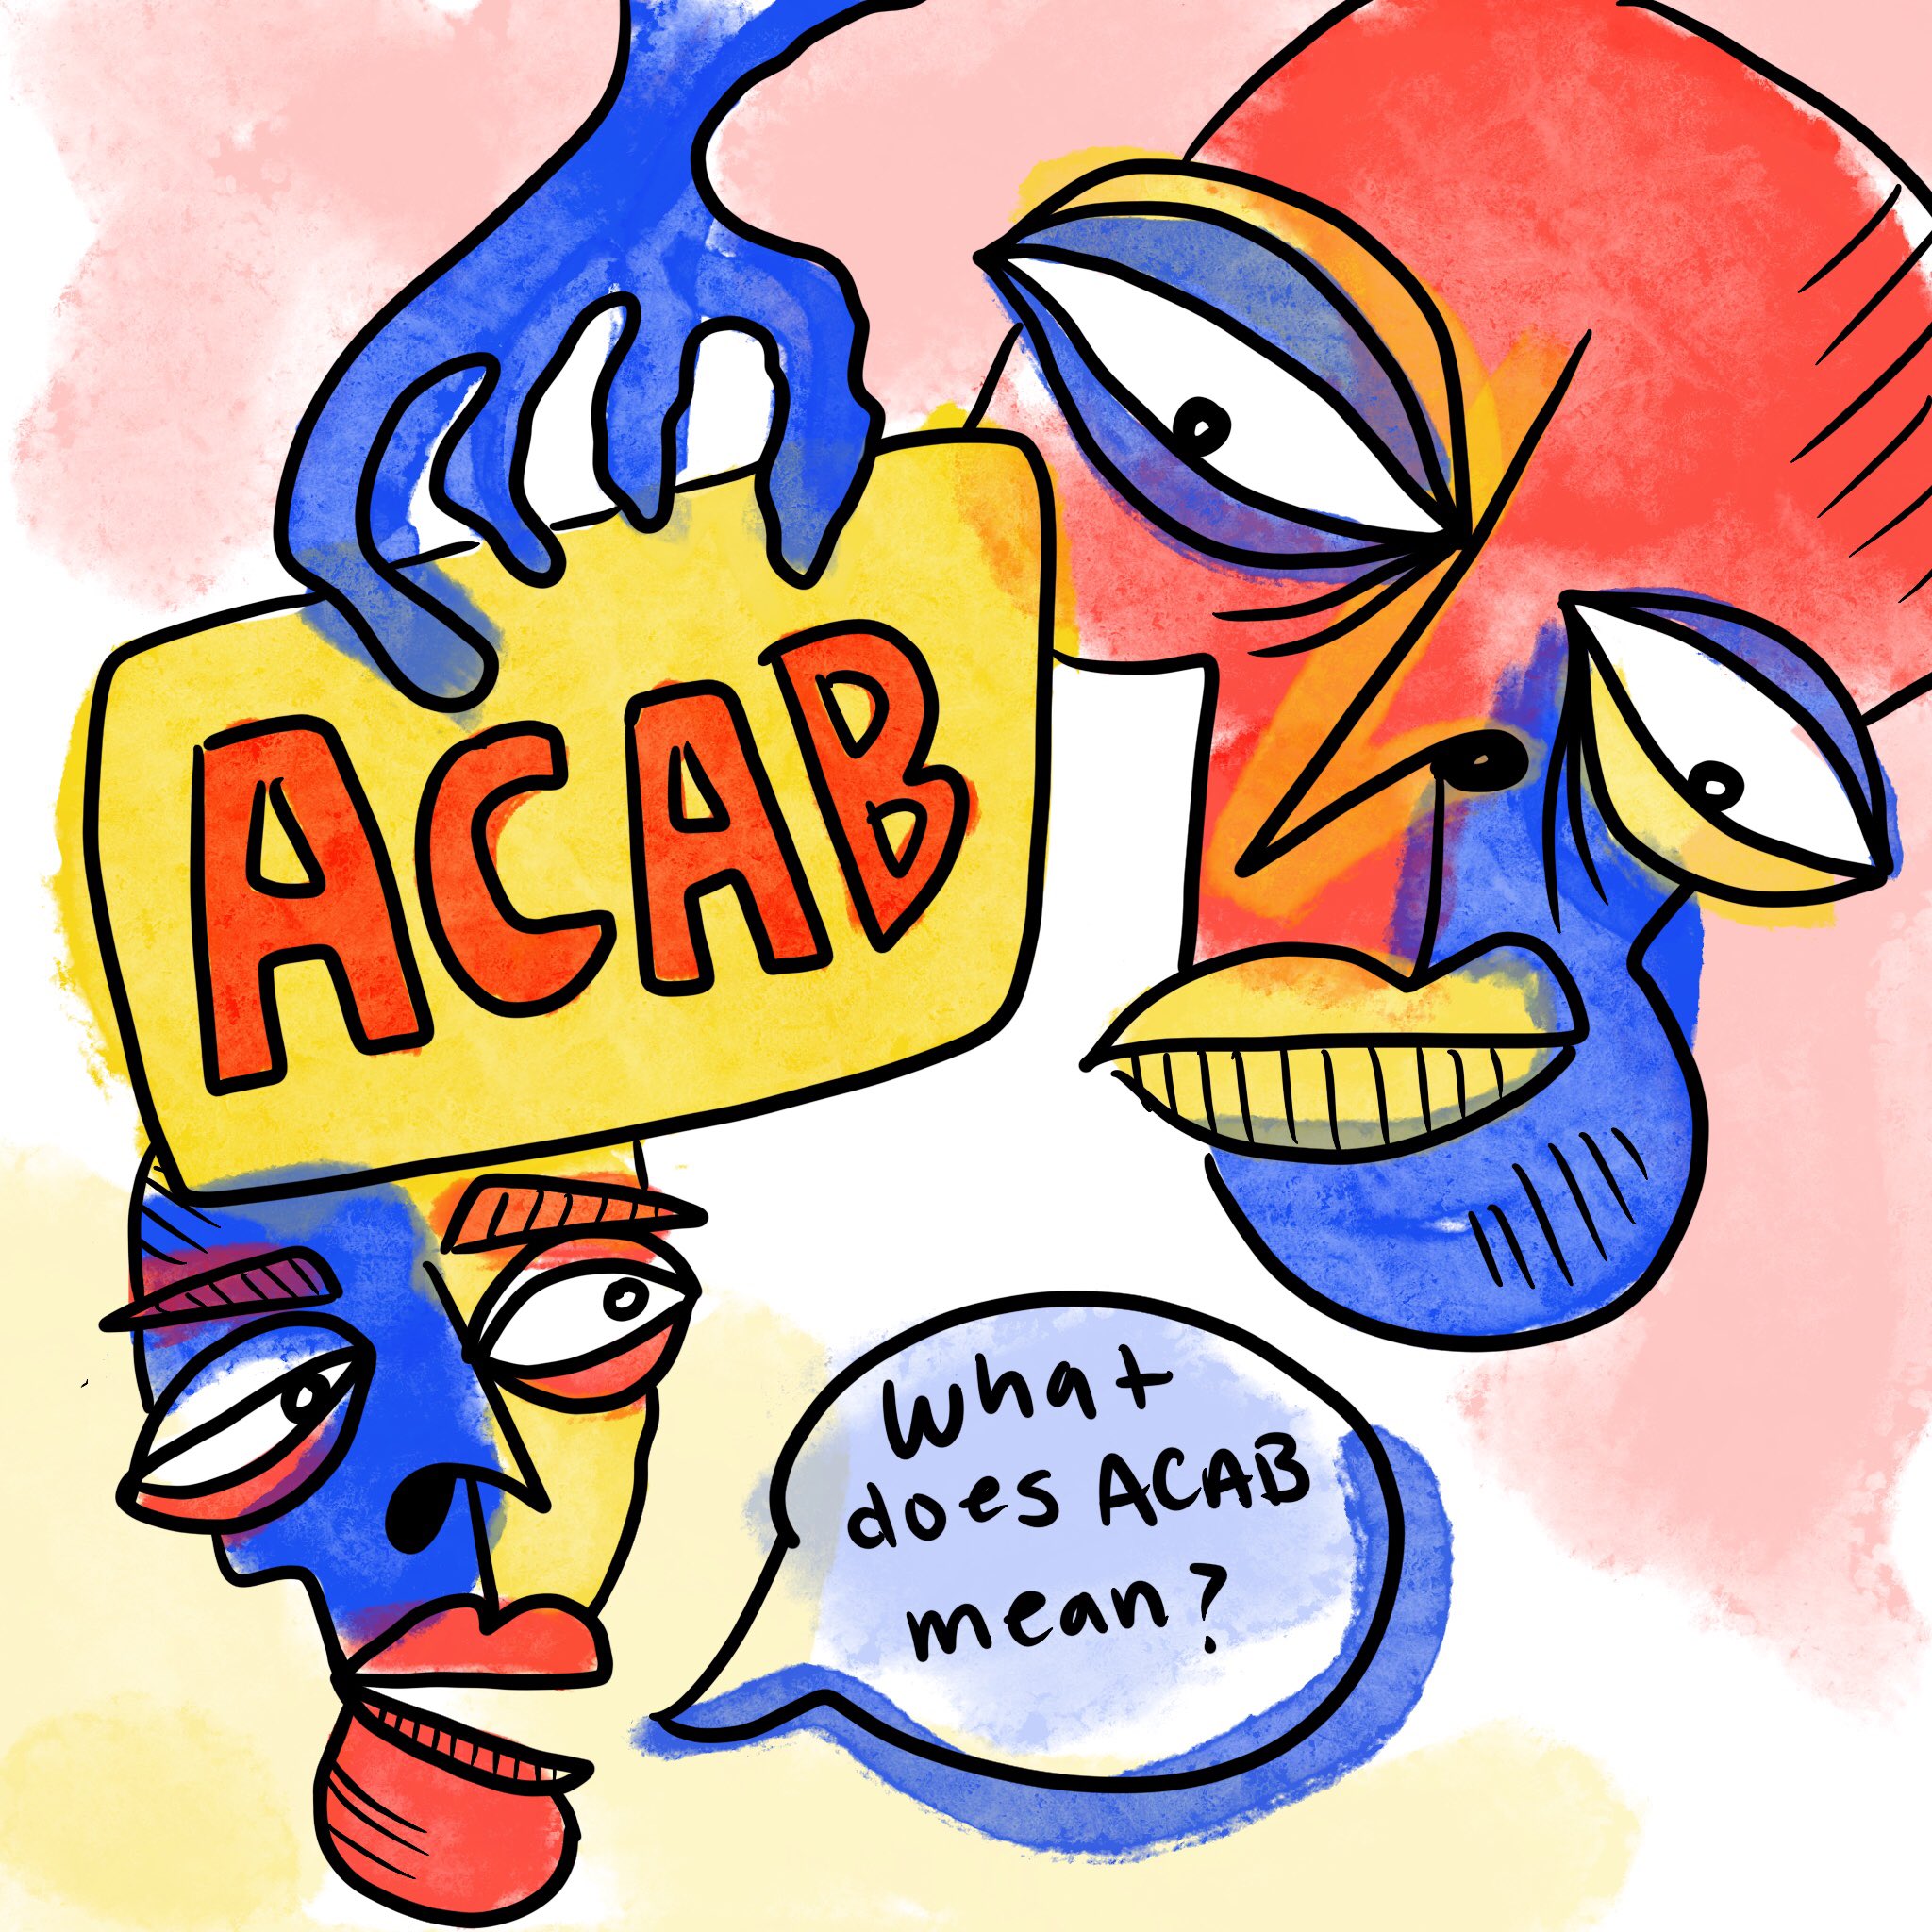 art by @furbyrose on twitter and @mrosearts on instagram. head1 holding ACAB sign. head2 asking 'What does ACAB mean?'